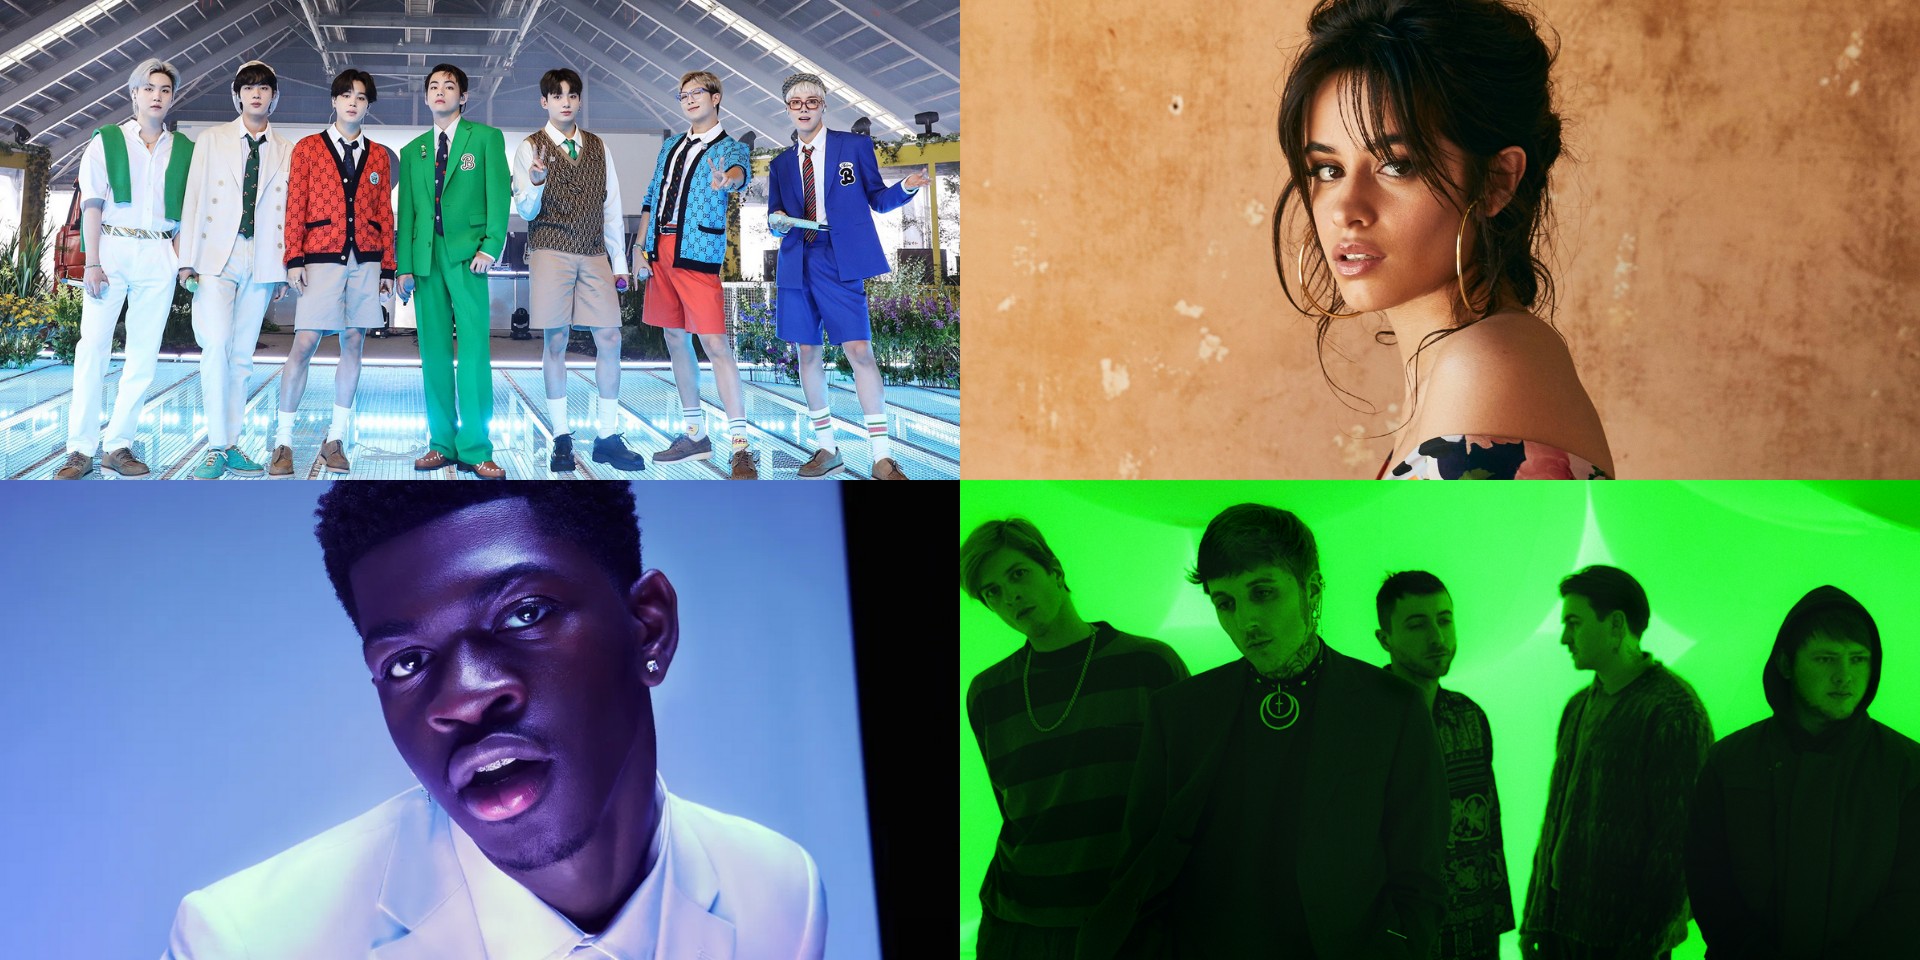 BBC Radio 1 Live Lounge to air 'Butter' performance by BTS, plus sets by Lil Nas X, Camila Cabello, Bring Me The Horizon, and more this September